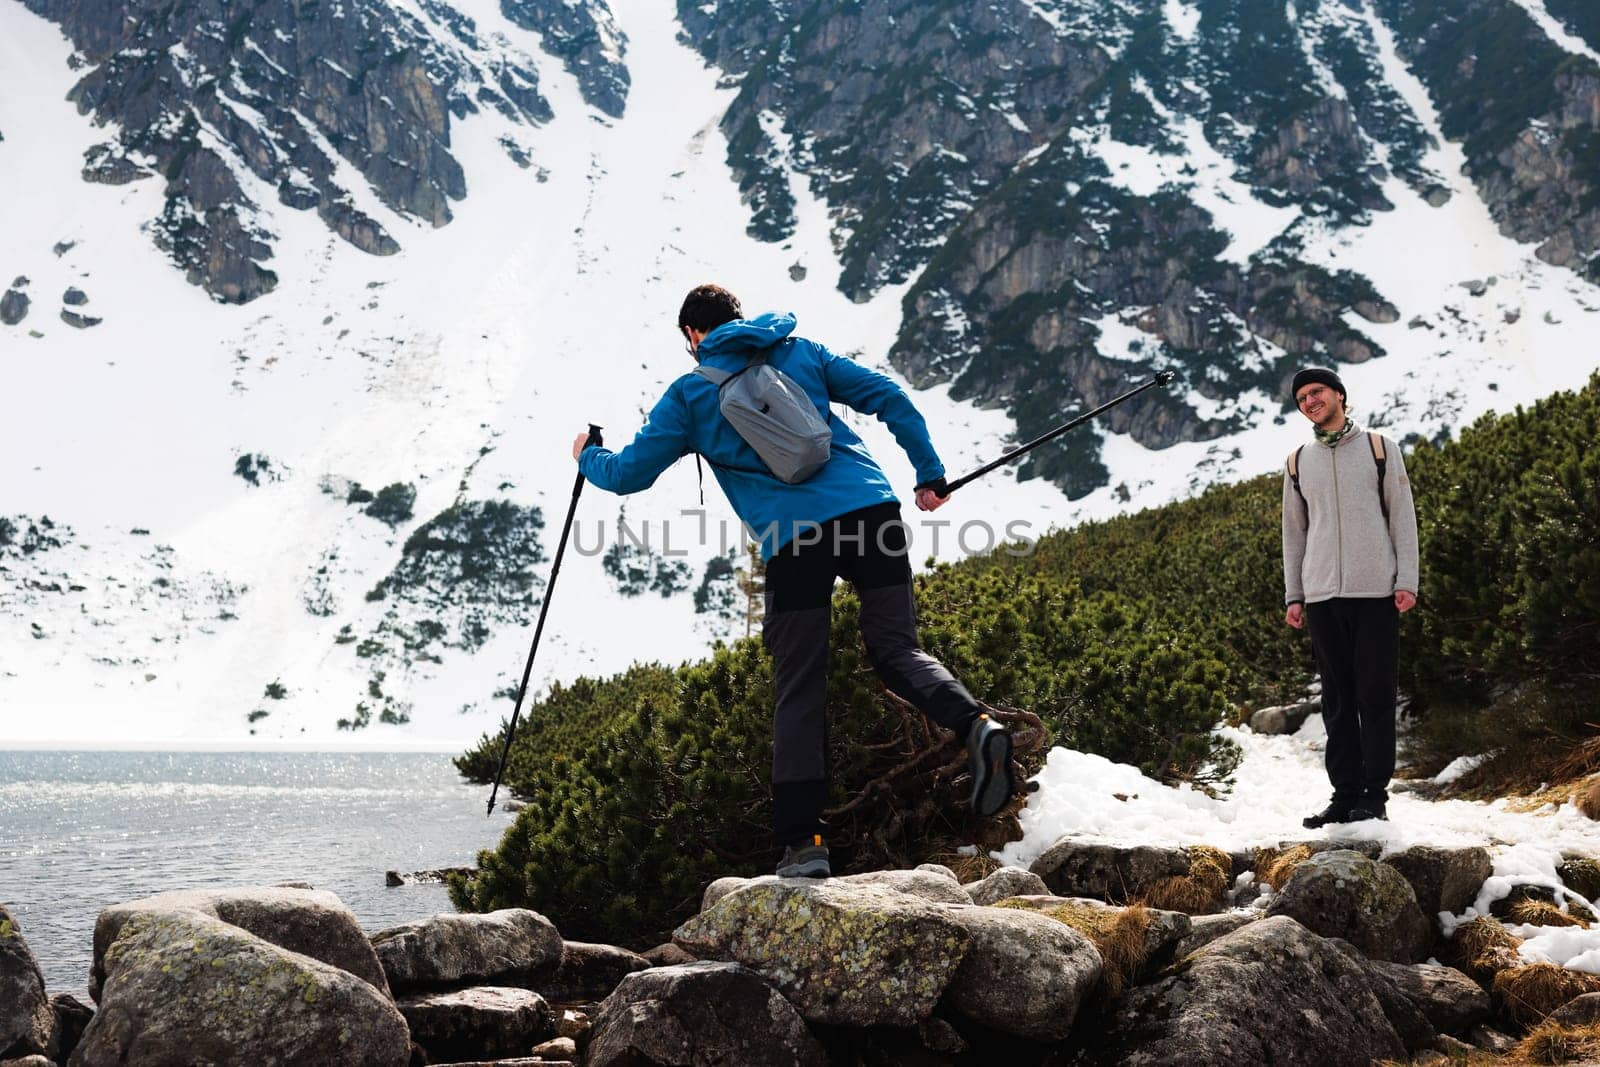 Two friends are trekking through the snowy mountains, enjoying the natural landscape and water views near a highland lake